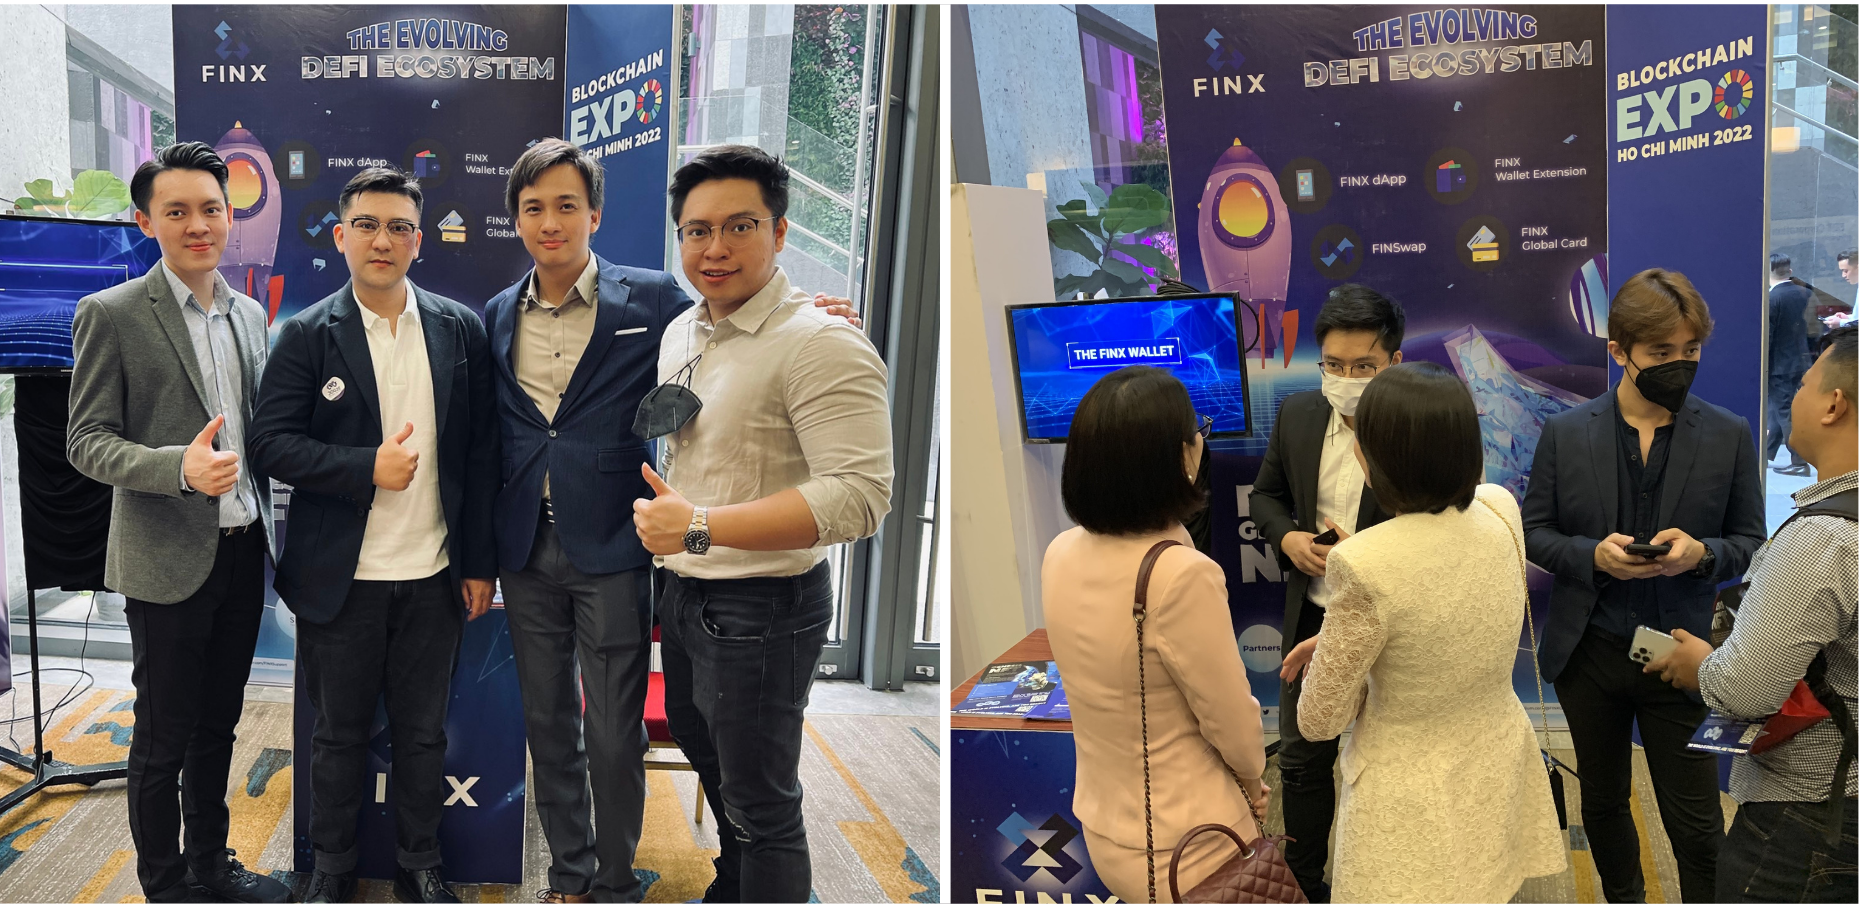 Left: Our Vietnam OG member, Abuken, came to our booth to visit us, Right: Our Team explain the project to the visitors